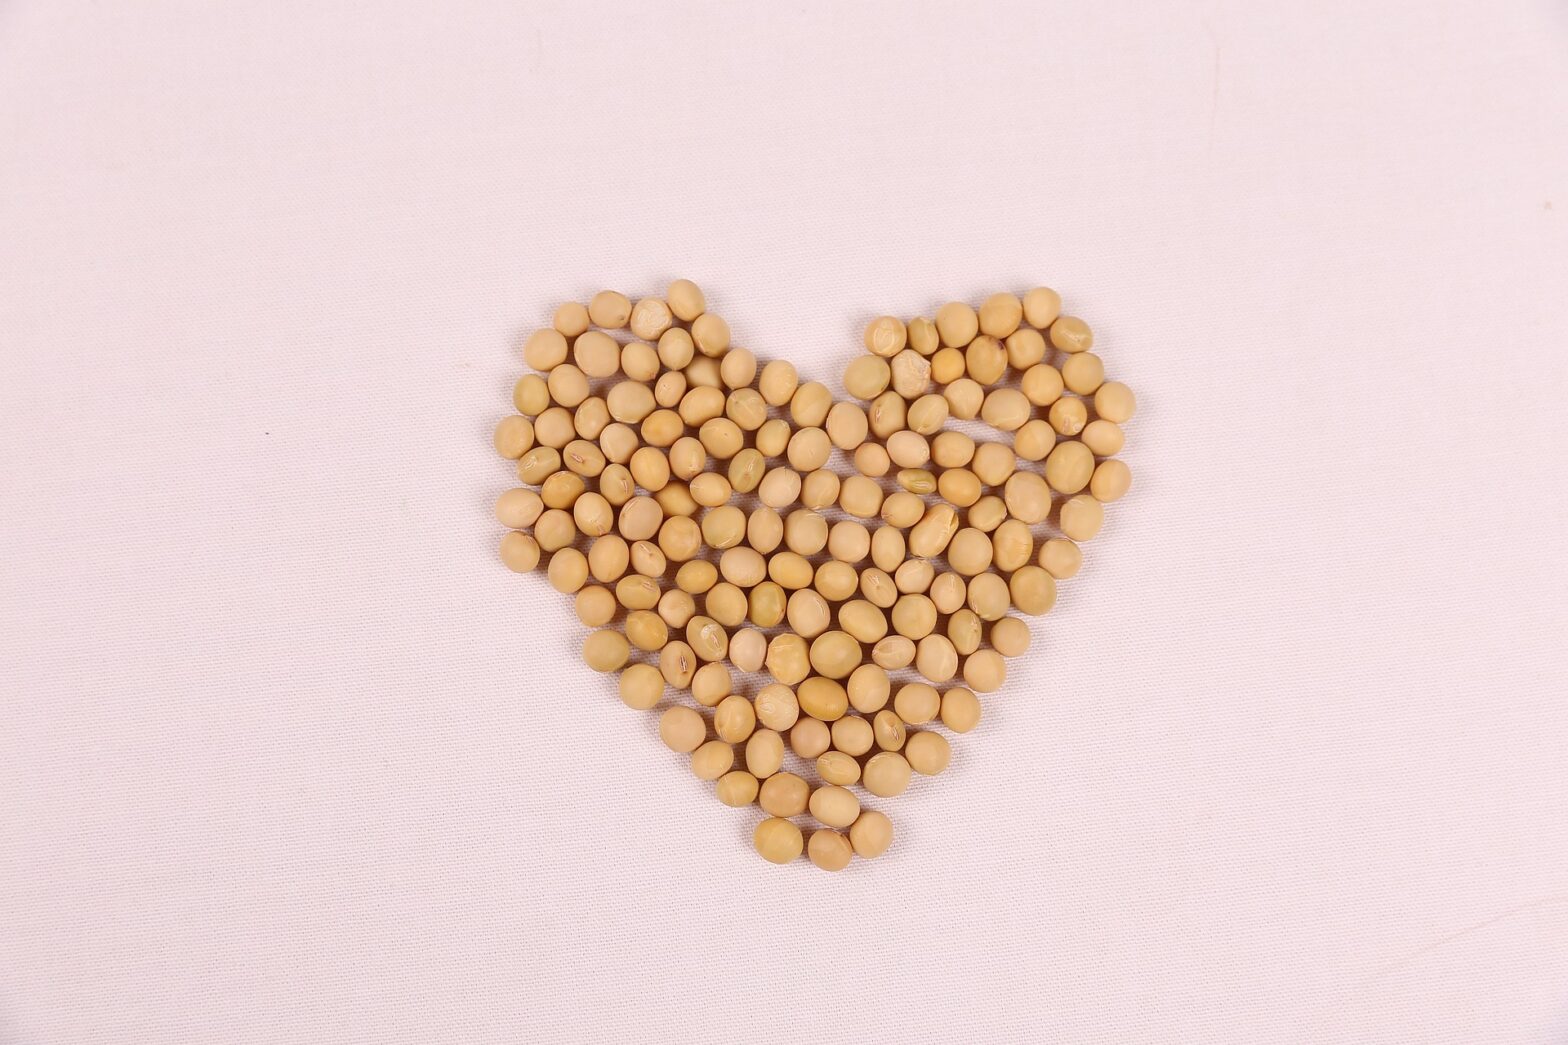 Pulses in the shape of a heart